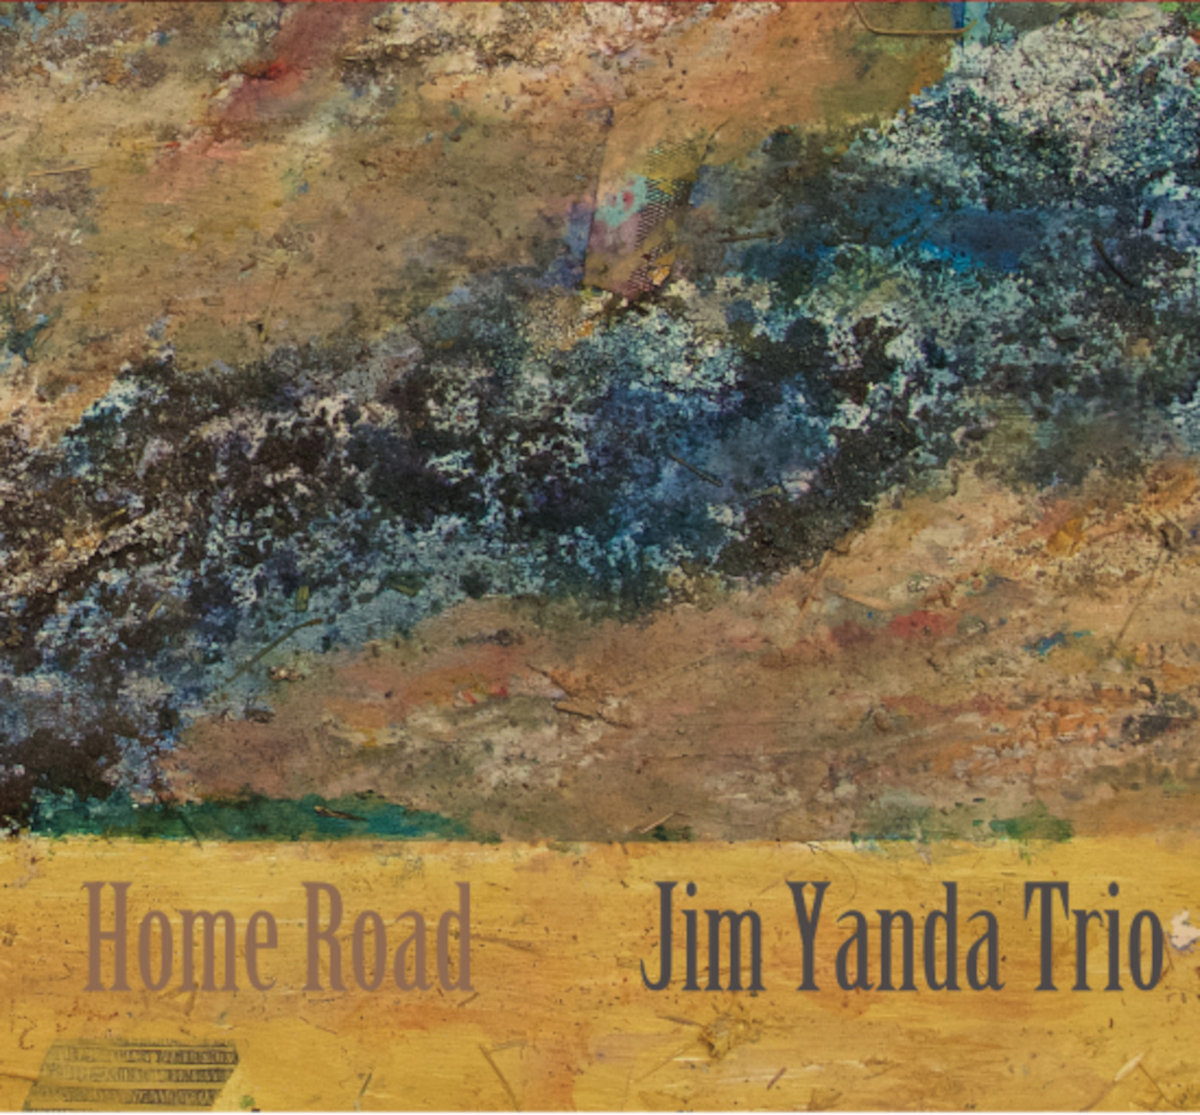 Home Road Cover art